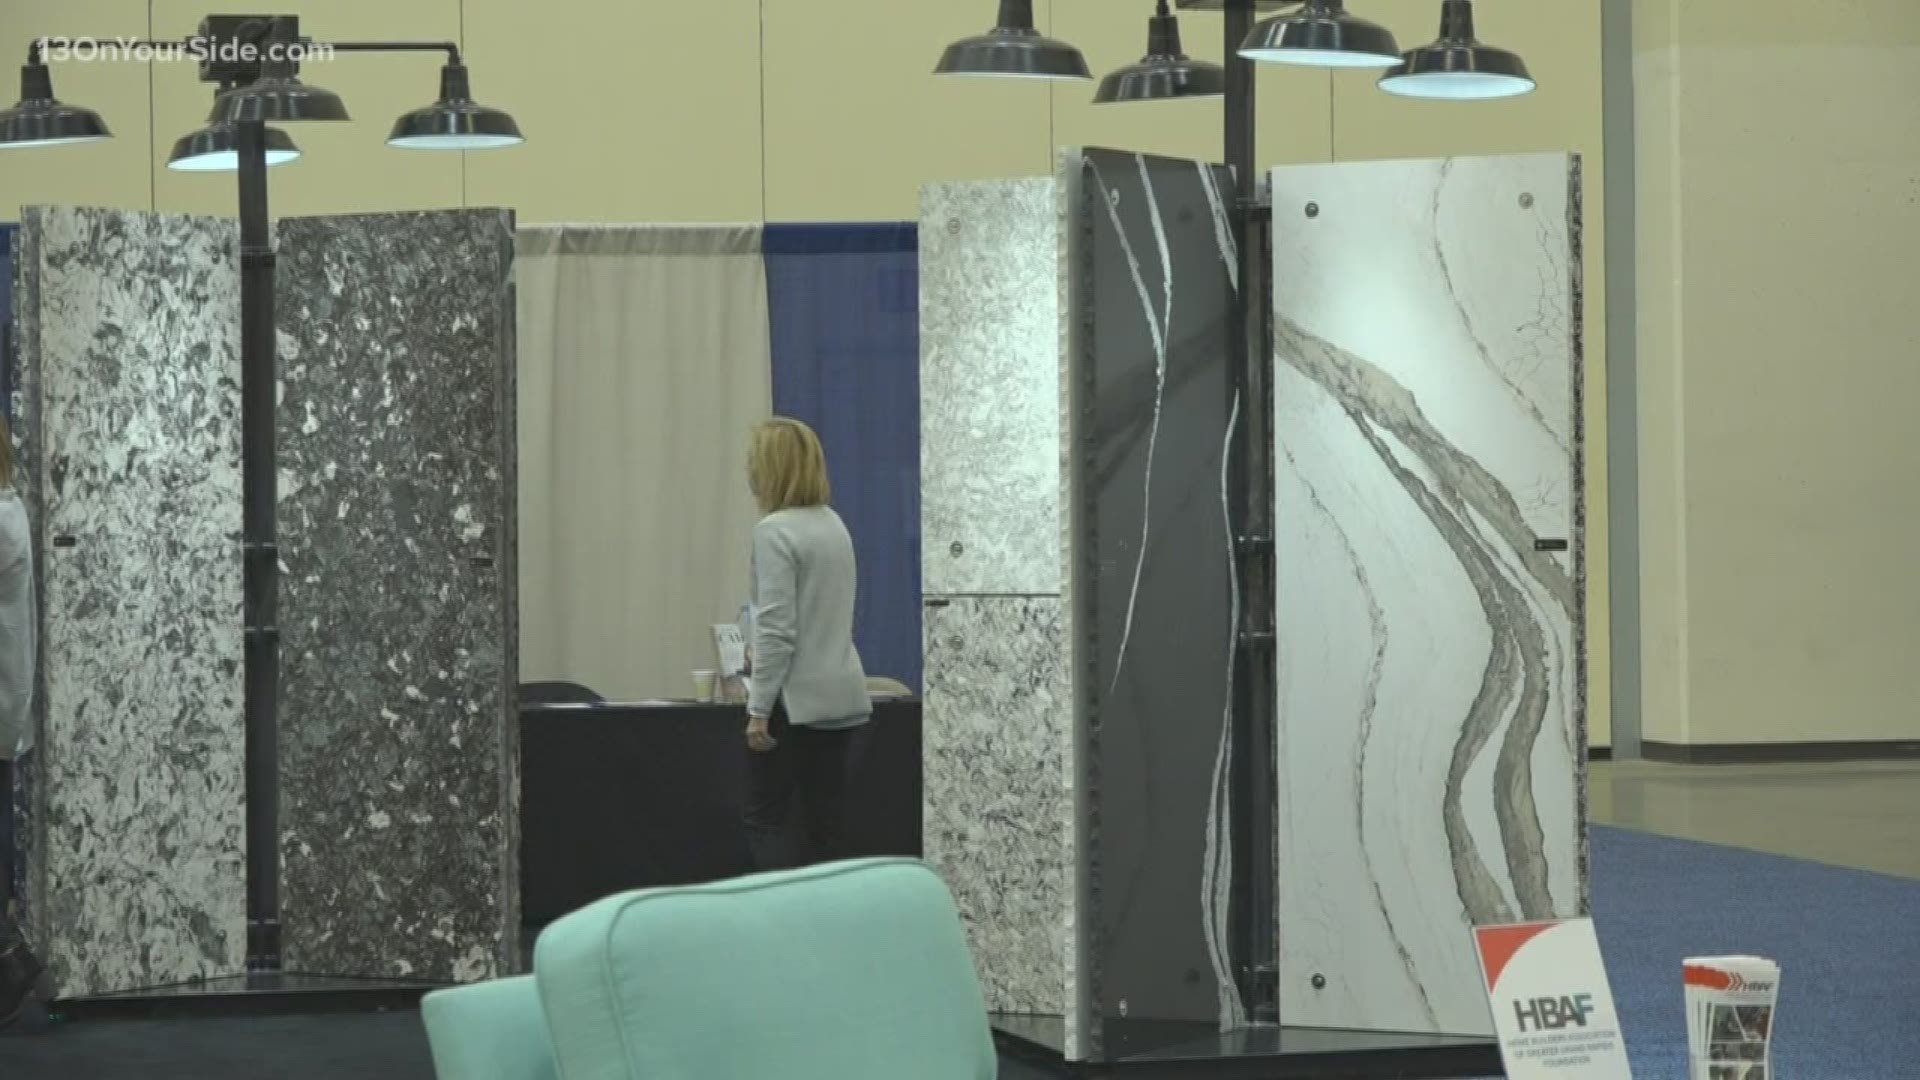 The Remodeling & New Homes show is happening this weekend at DeVos Place in Grand Rapids.